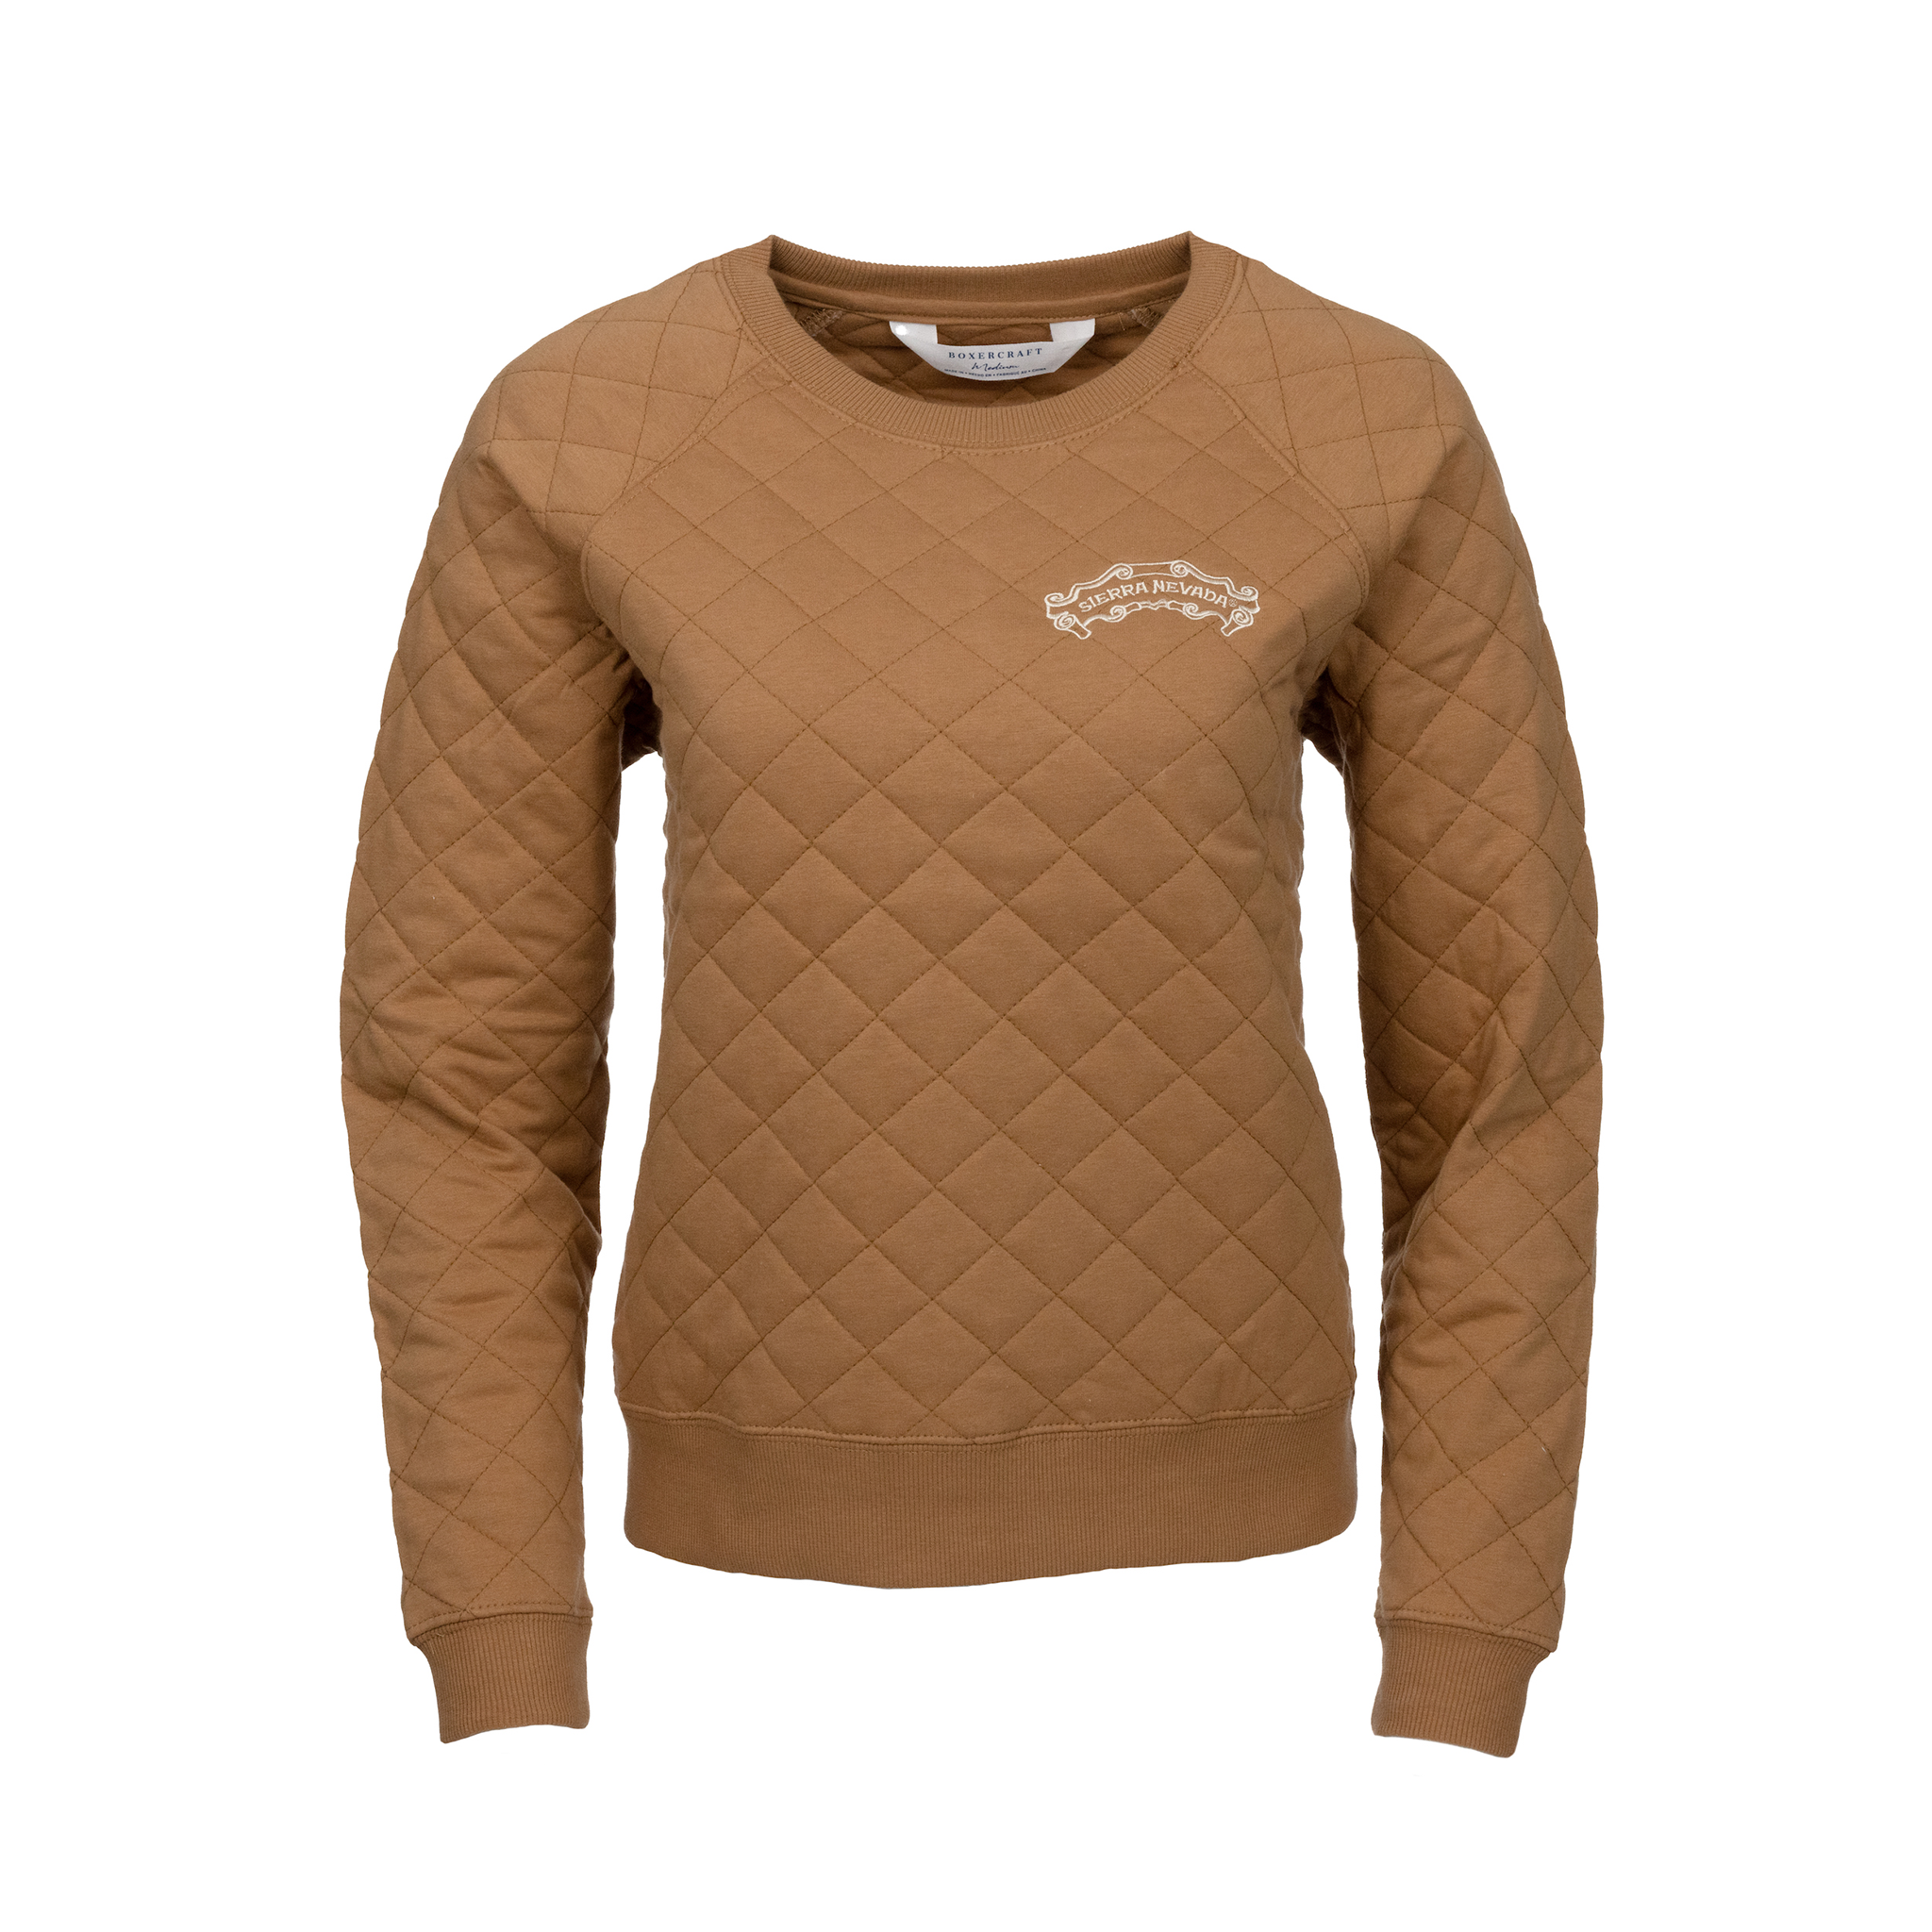 Women's Quilted Crewneck - XS